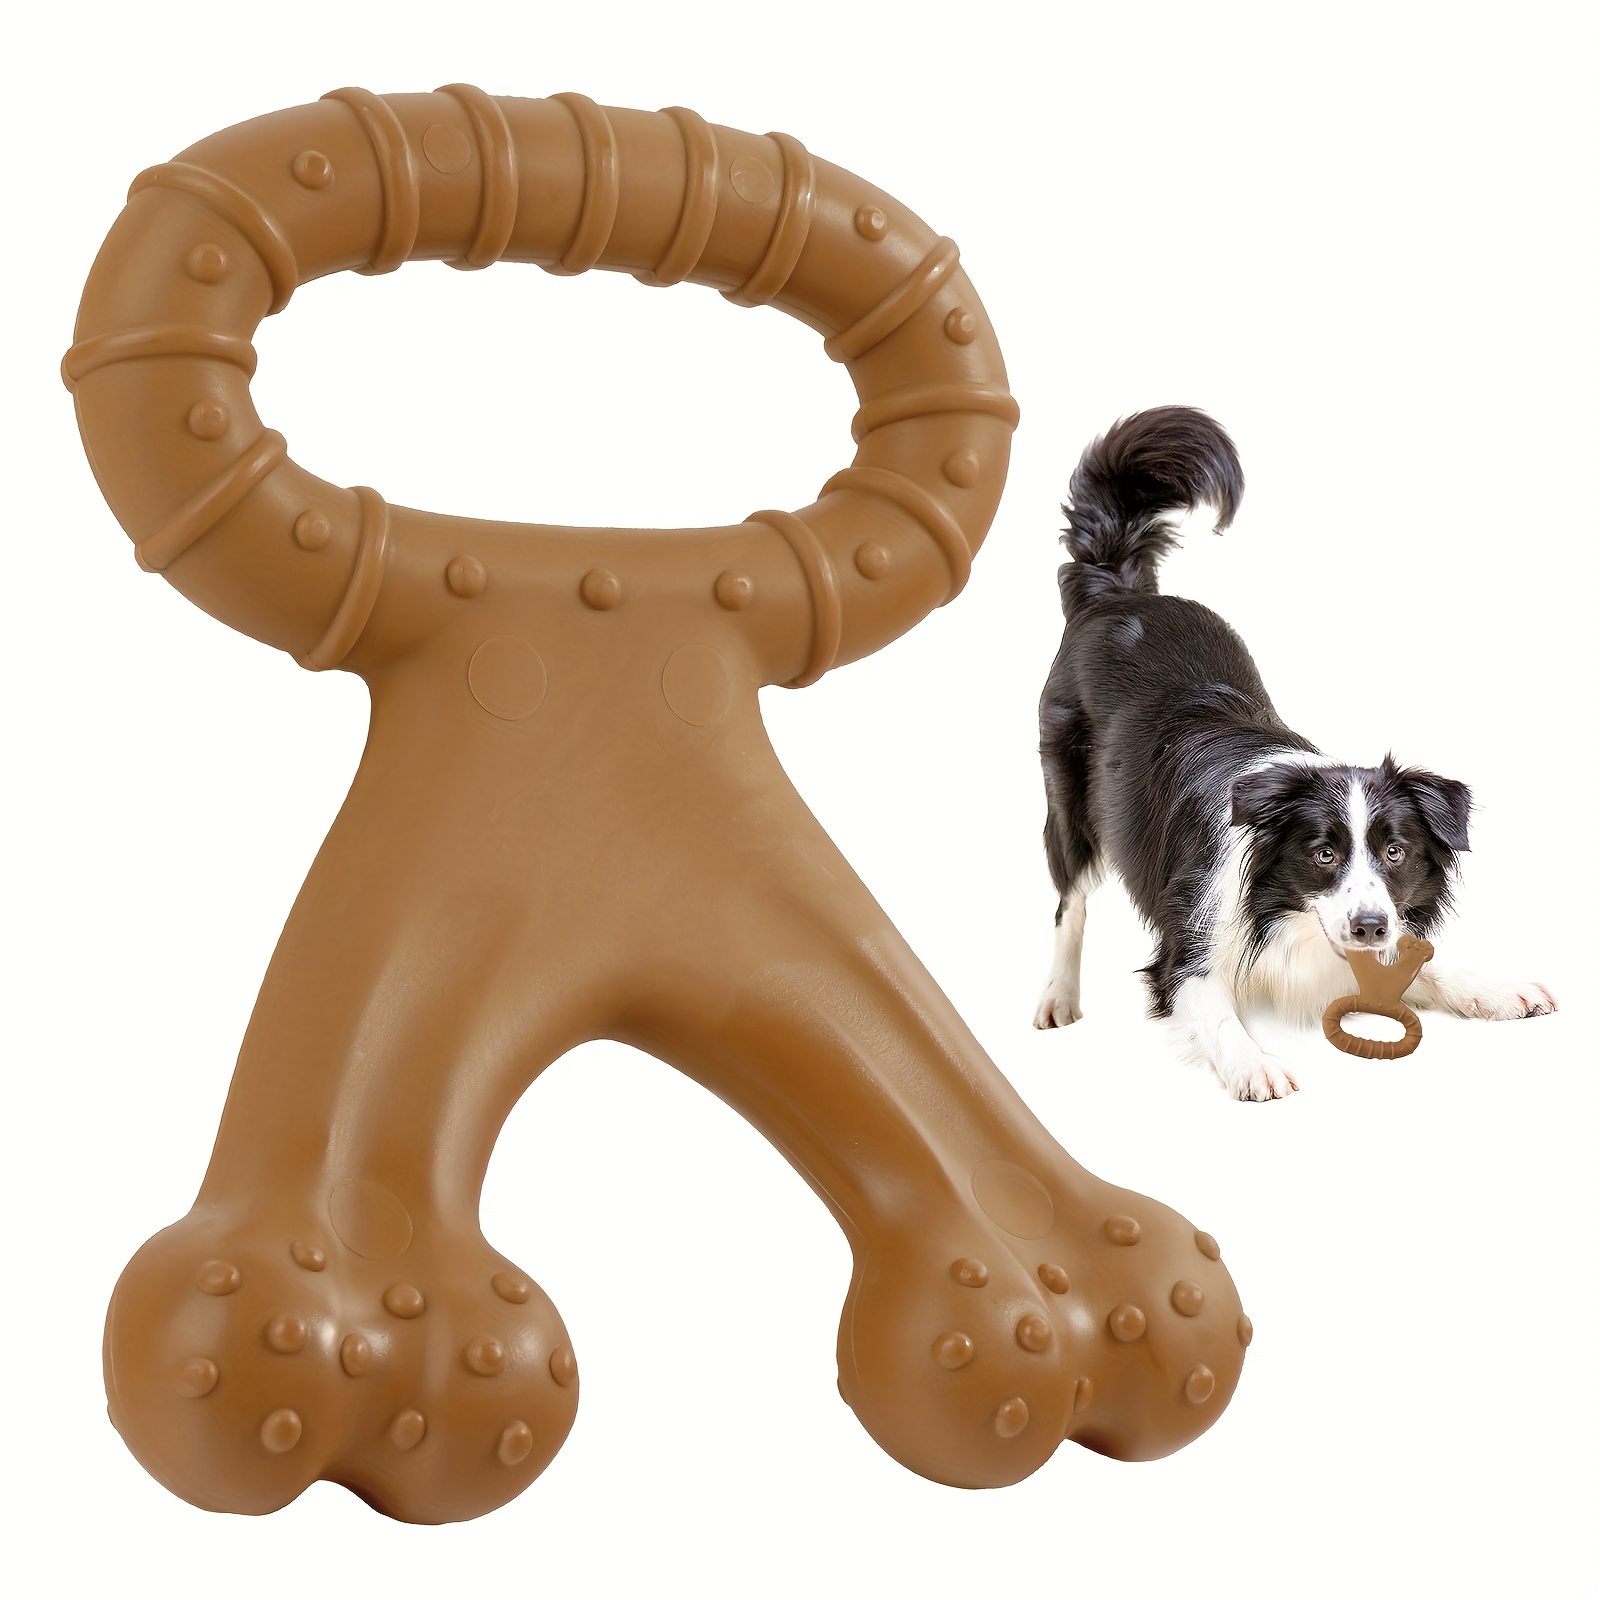 NOUGAT Dog Toys for Dogs Aggressive Chewers, Indestructible Dog